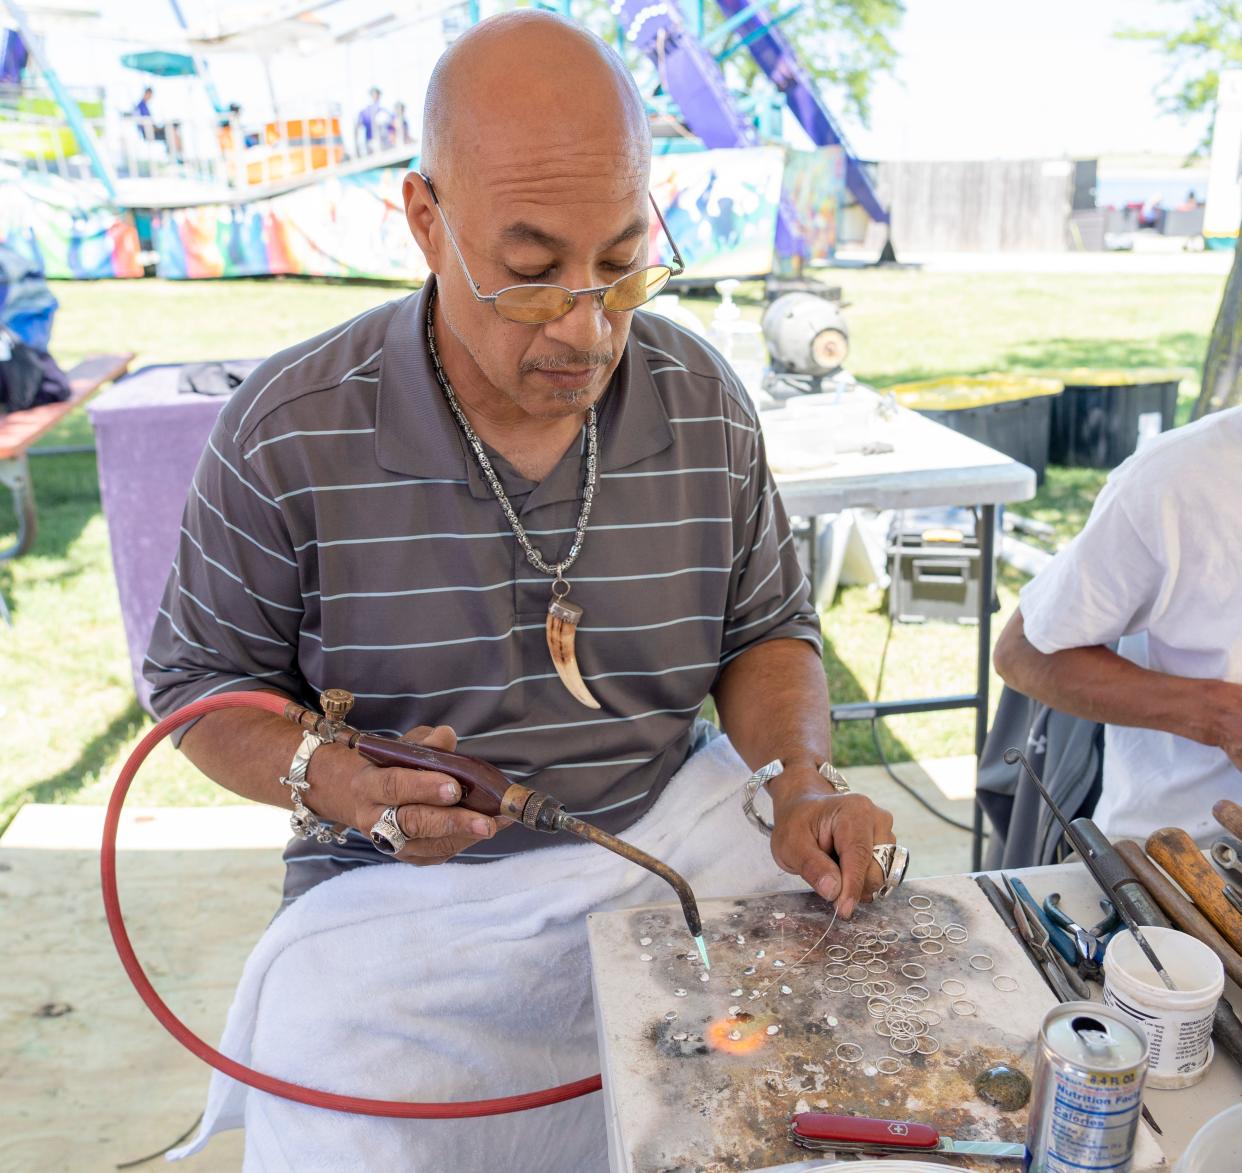 Manuel Corona Sr., owner of Khepra Jewelers, makes one-of-a-kind rings at his stand in Summerfest on Thursday, June 23, 2022 at the Henry Maier Festival Park in Milwaukee.